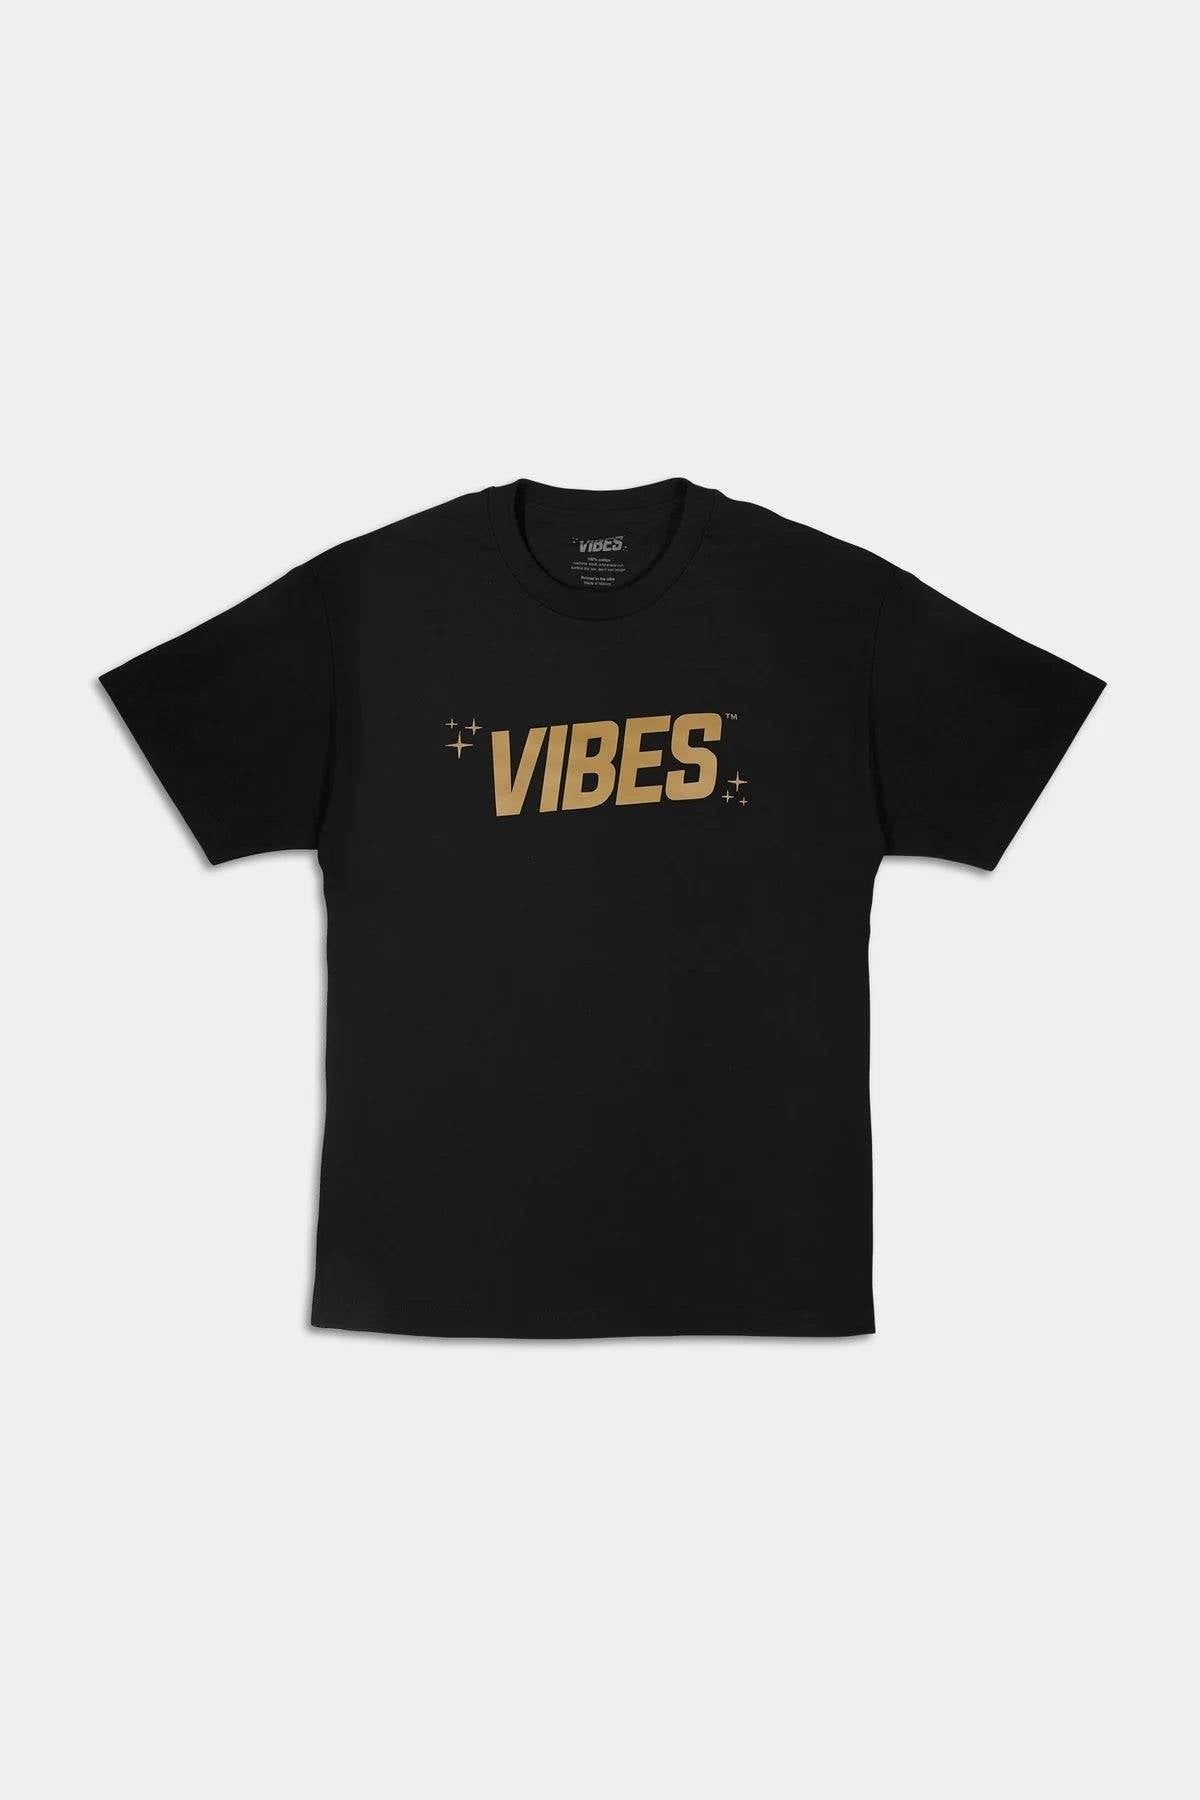 VIBES Black With Gold Logo T-Shirt Small